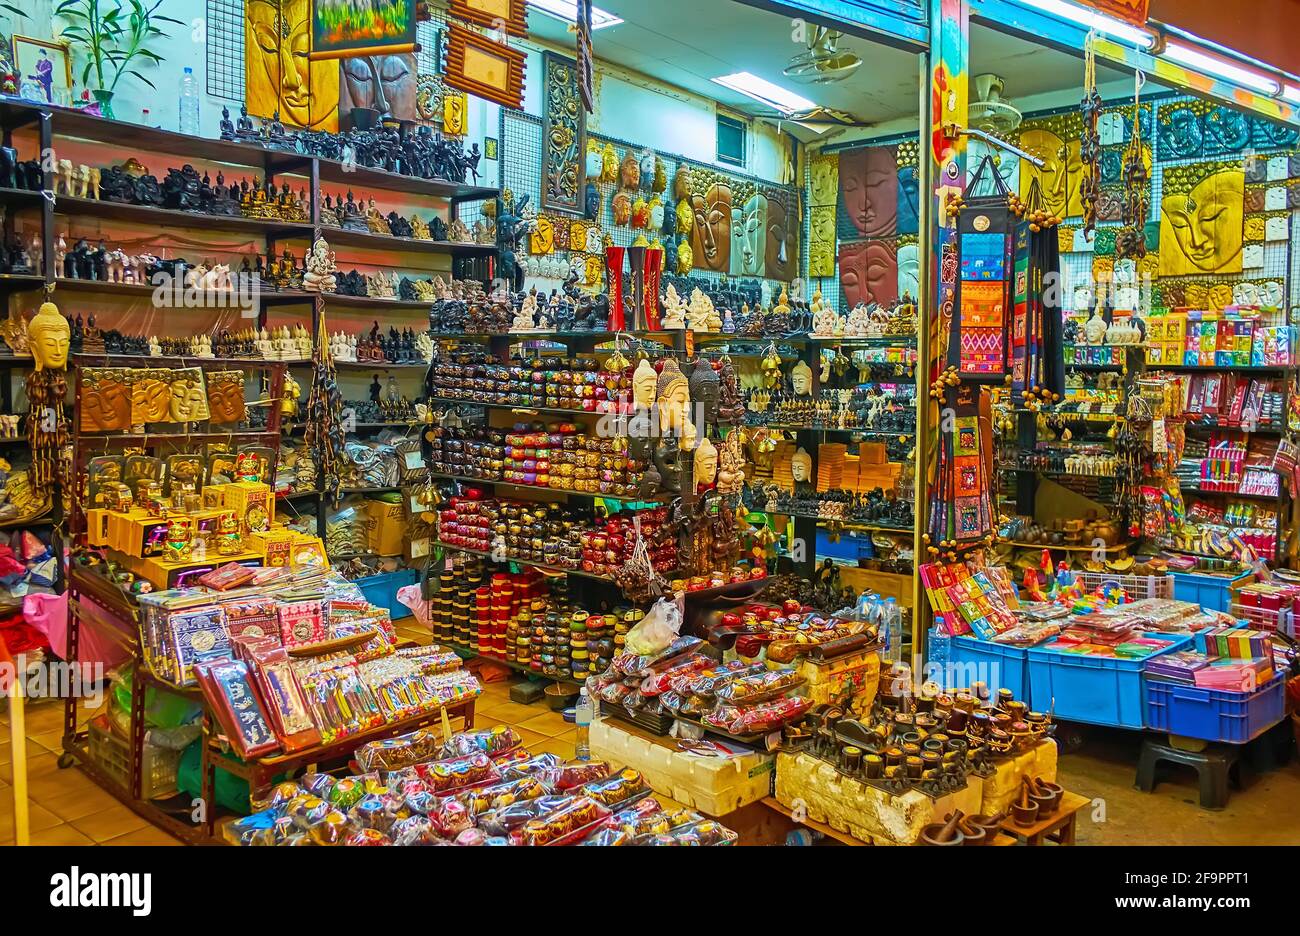 The souvenir store with wooden, plaster, plastic, metal statuettes,  figurines, Buddha Images, toys, magnets and other items, Khaosan Road,  Bangkok, Th Stock Photo - Alamy